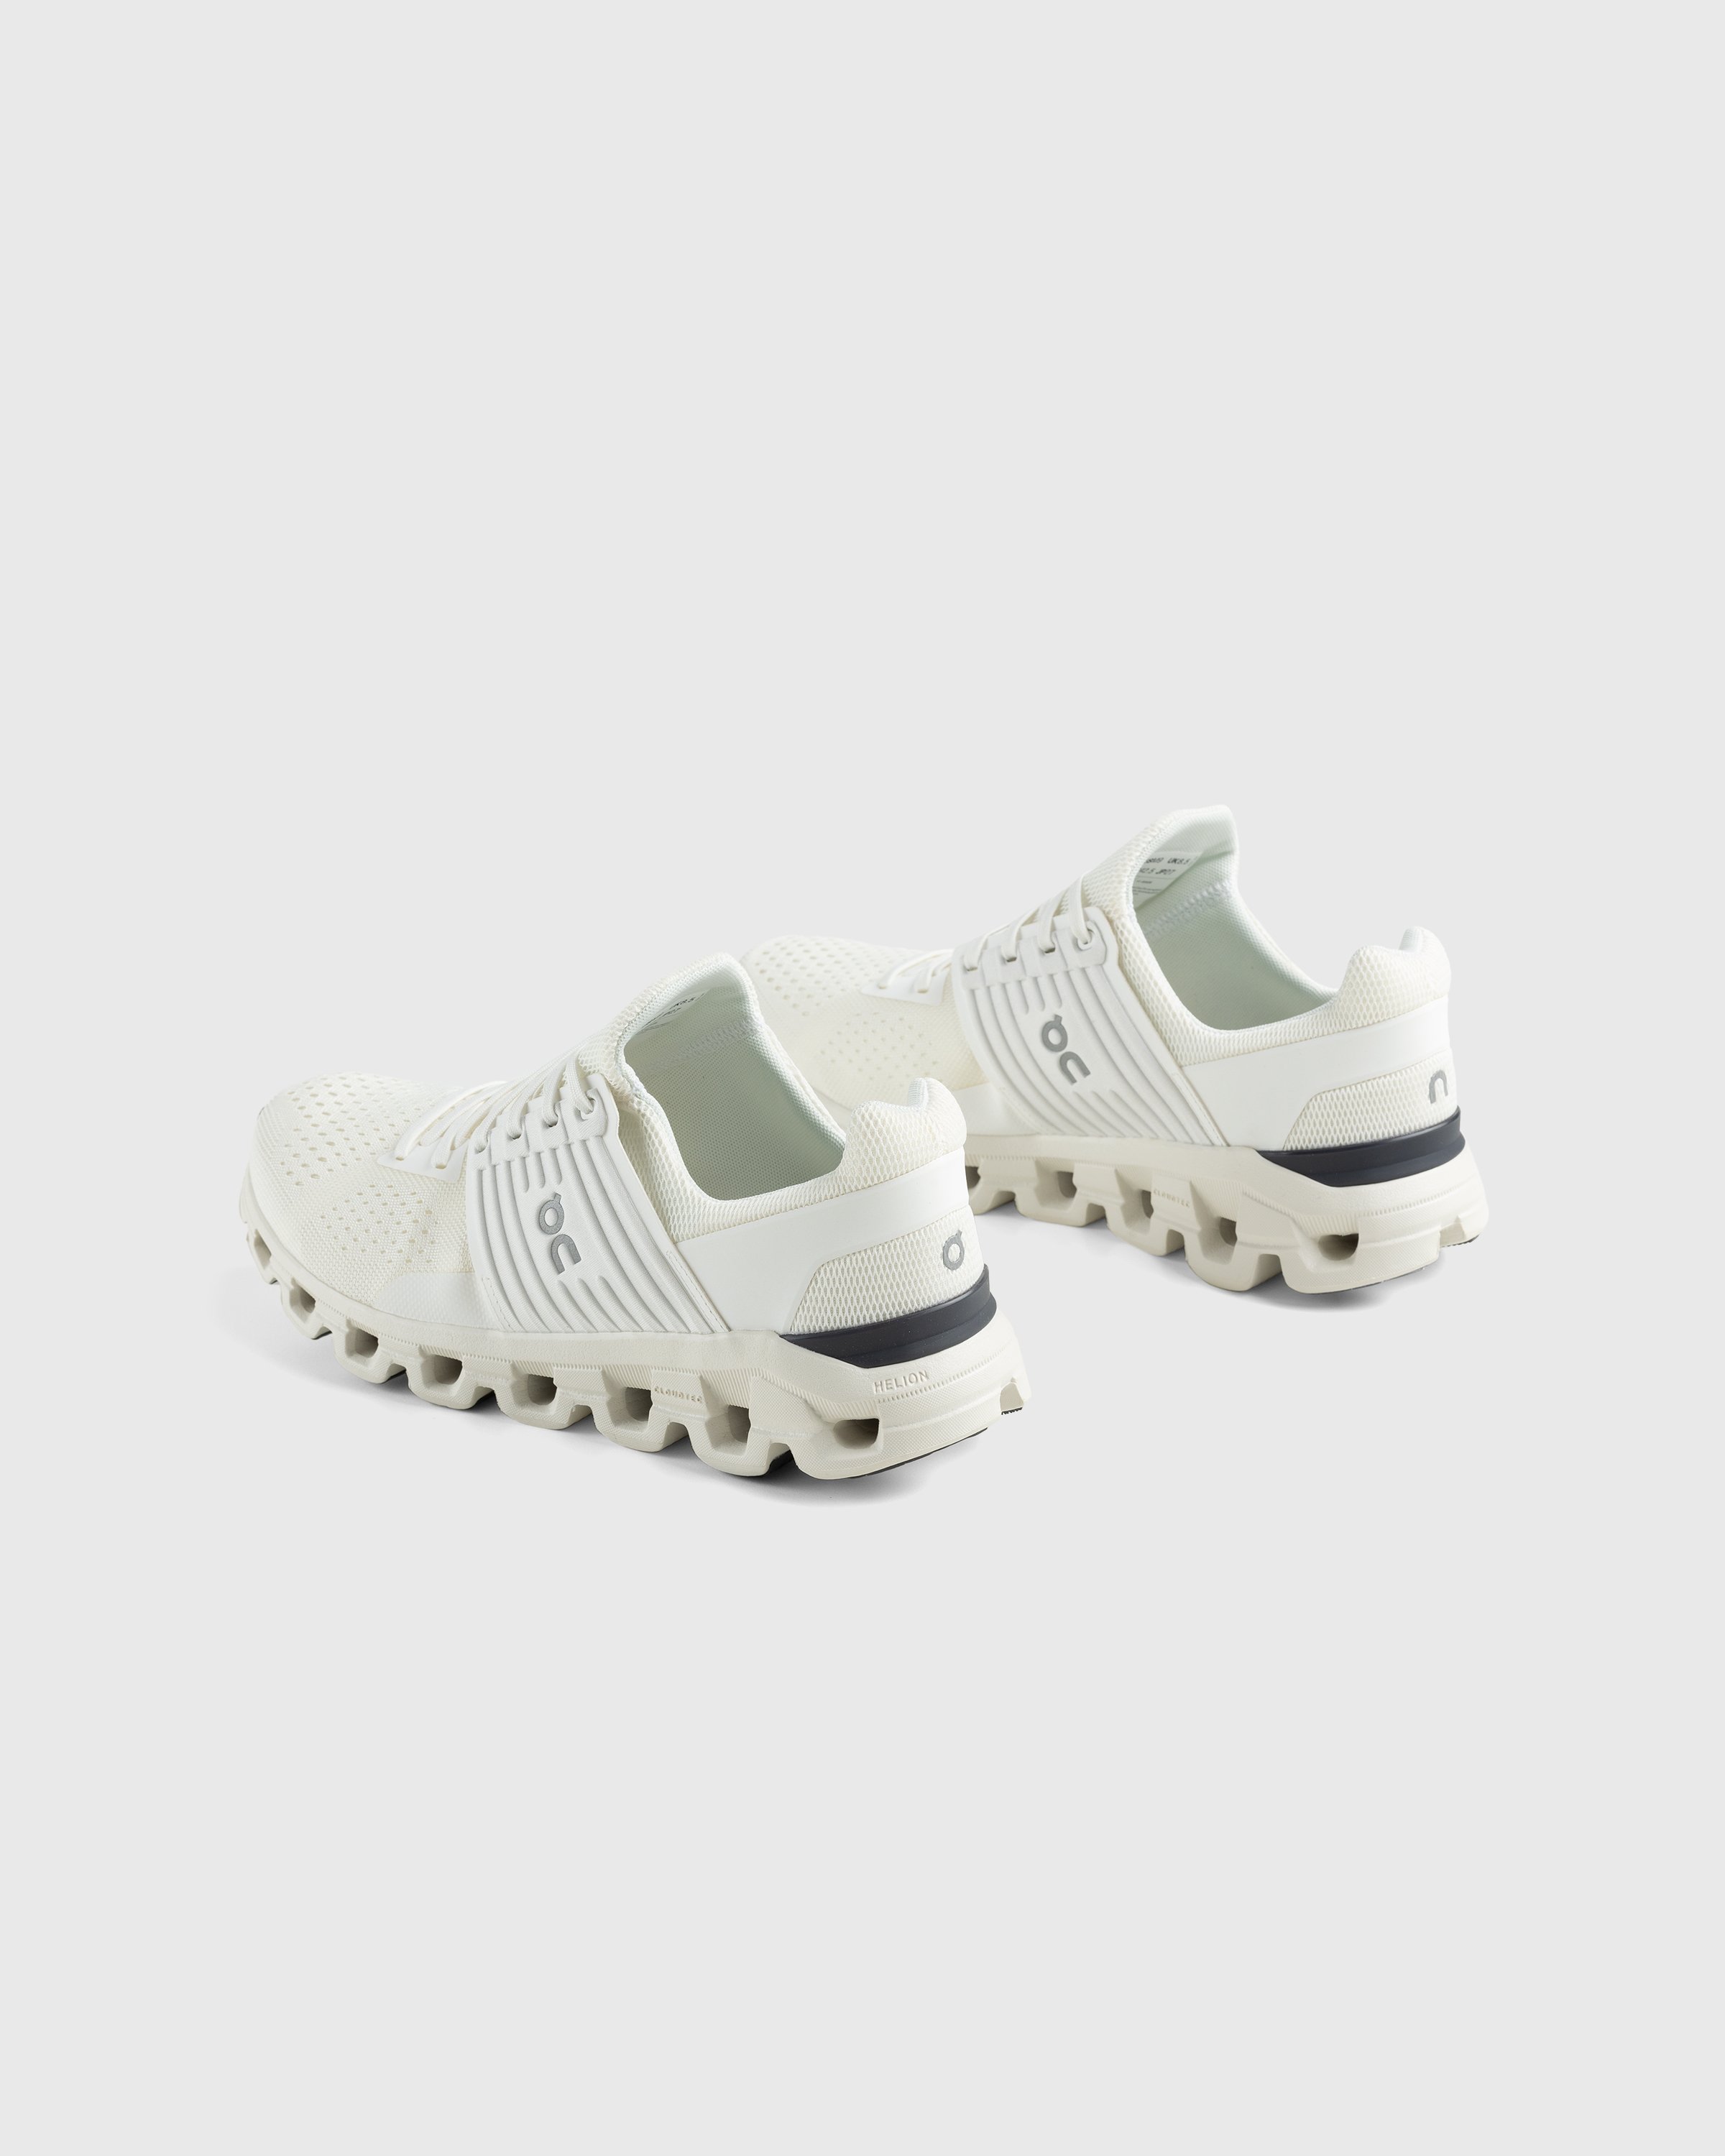 On - Cloudswift All White - Footwear - White - Image 4